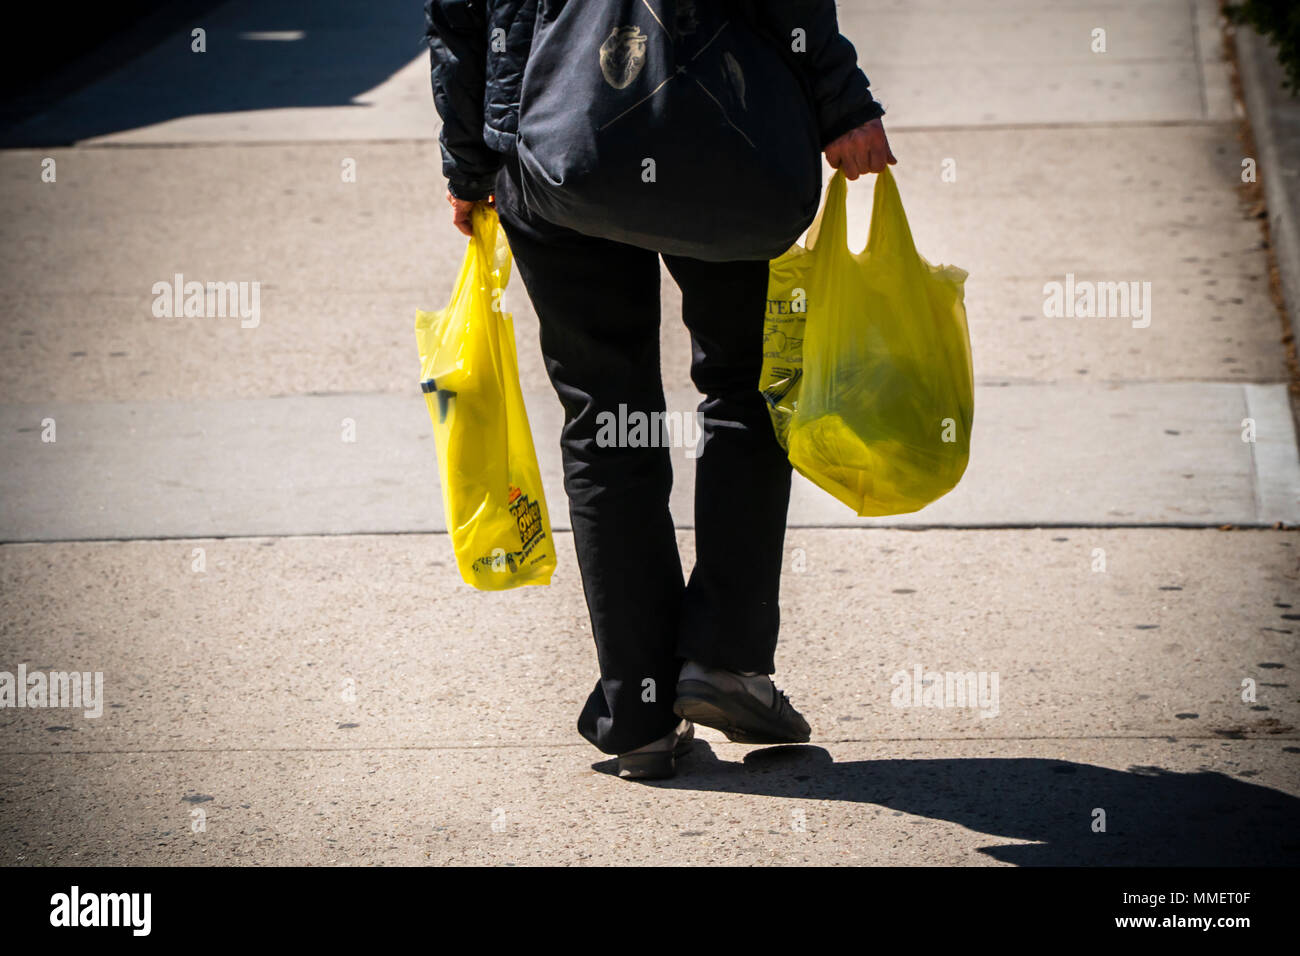 A shopper with her supermarket plastic bags in New York on Thursday, April 26, 2018. New York State Gov. Andrew Cuomo announced his intention to institute a statewide ban on single-use plastic bags, after previously opposing similar legislation proposed by New York City.  (Â© Richard B. Levine) Stock Photo